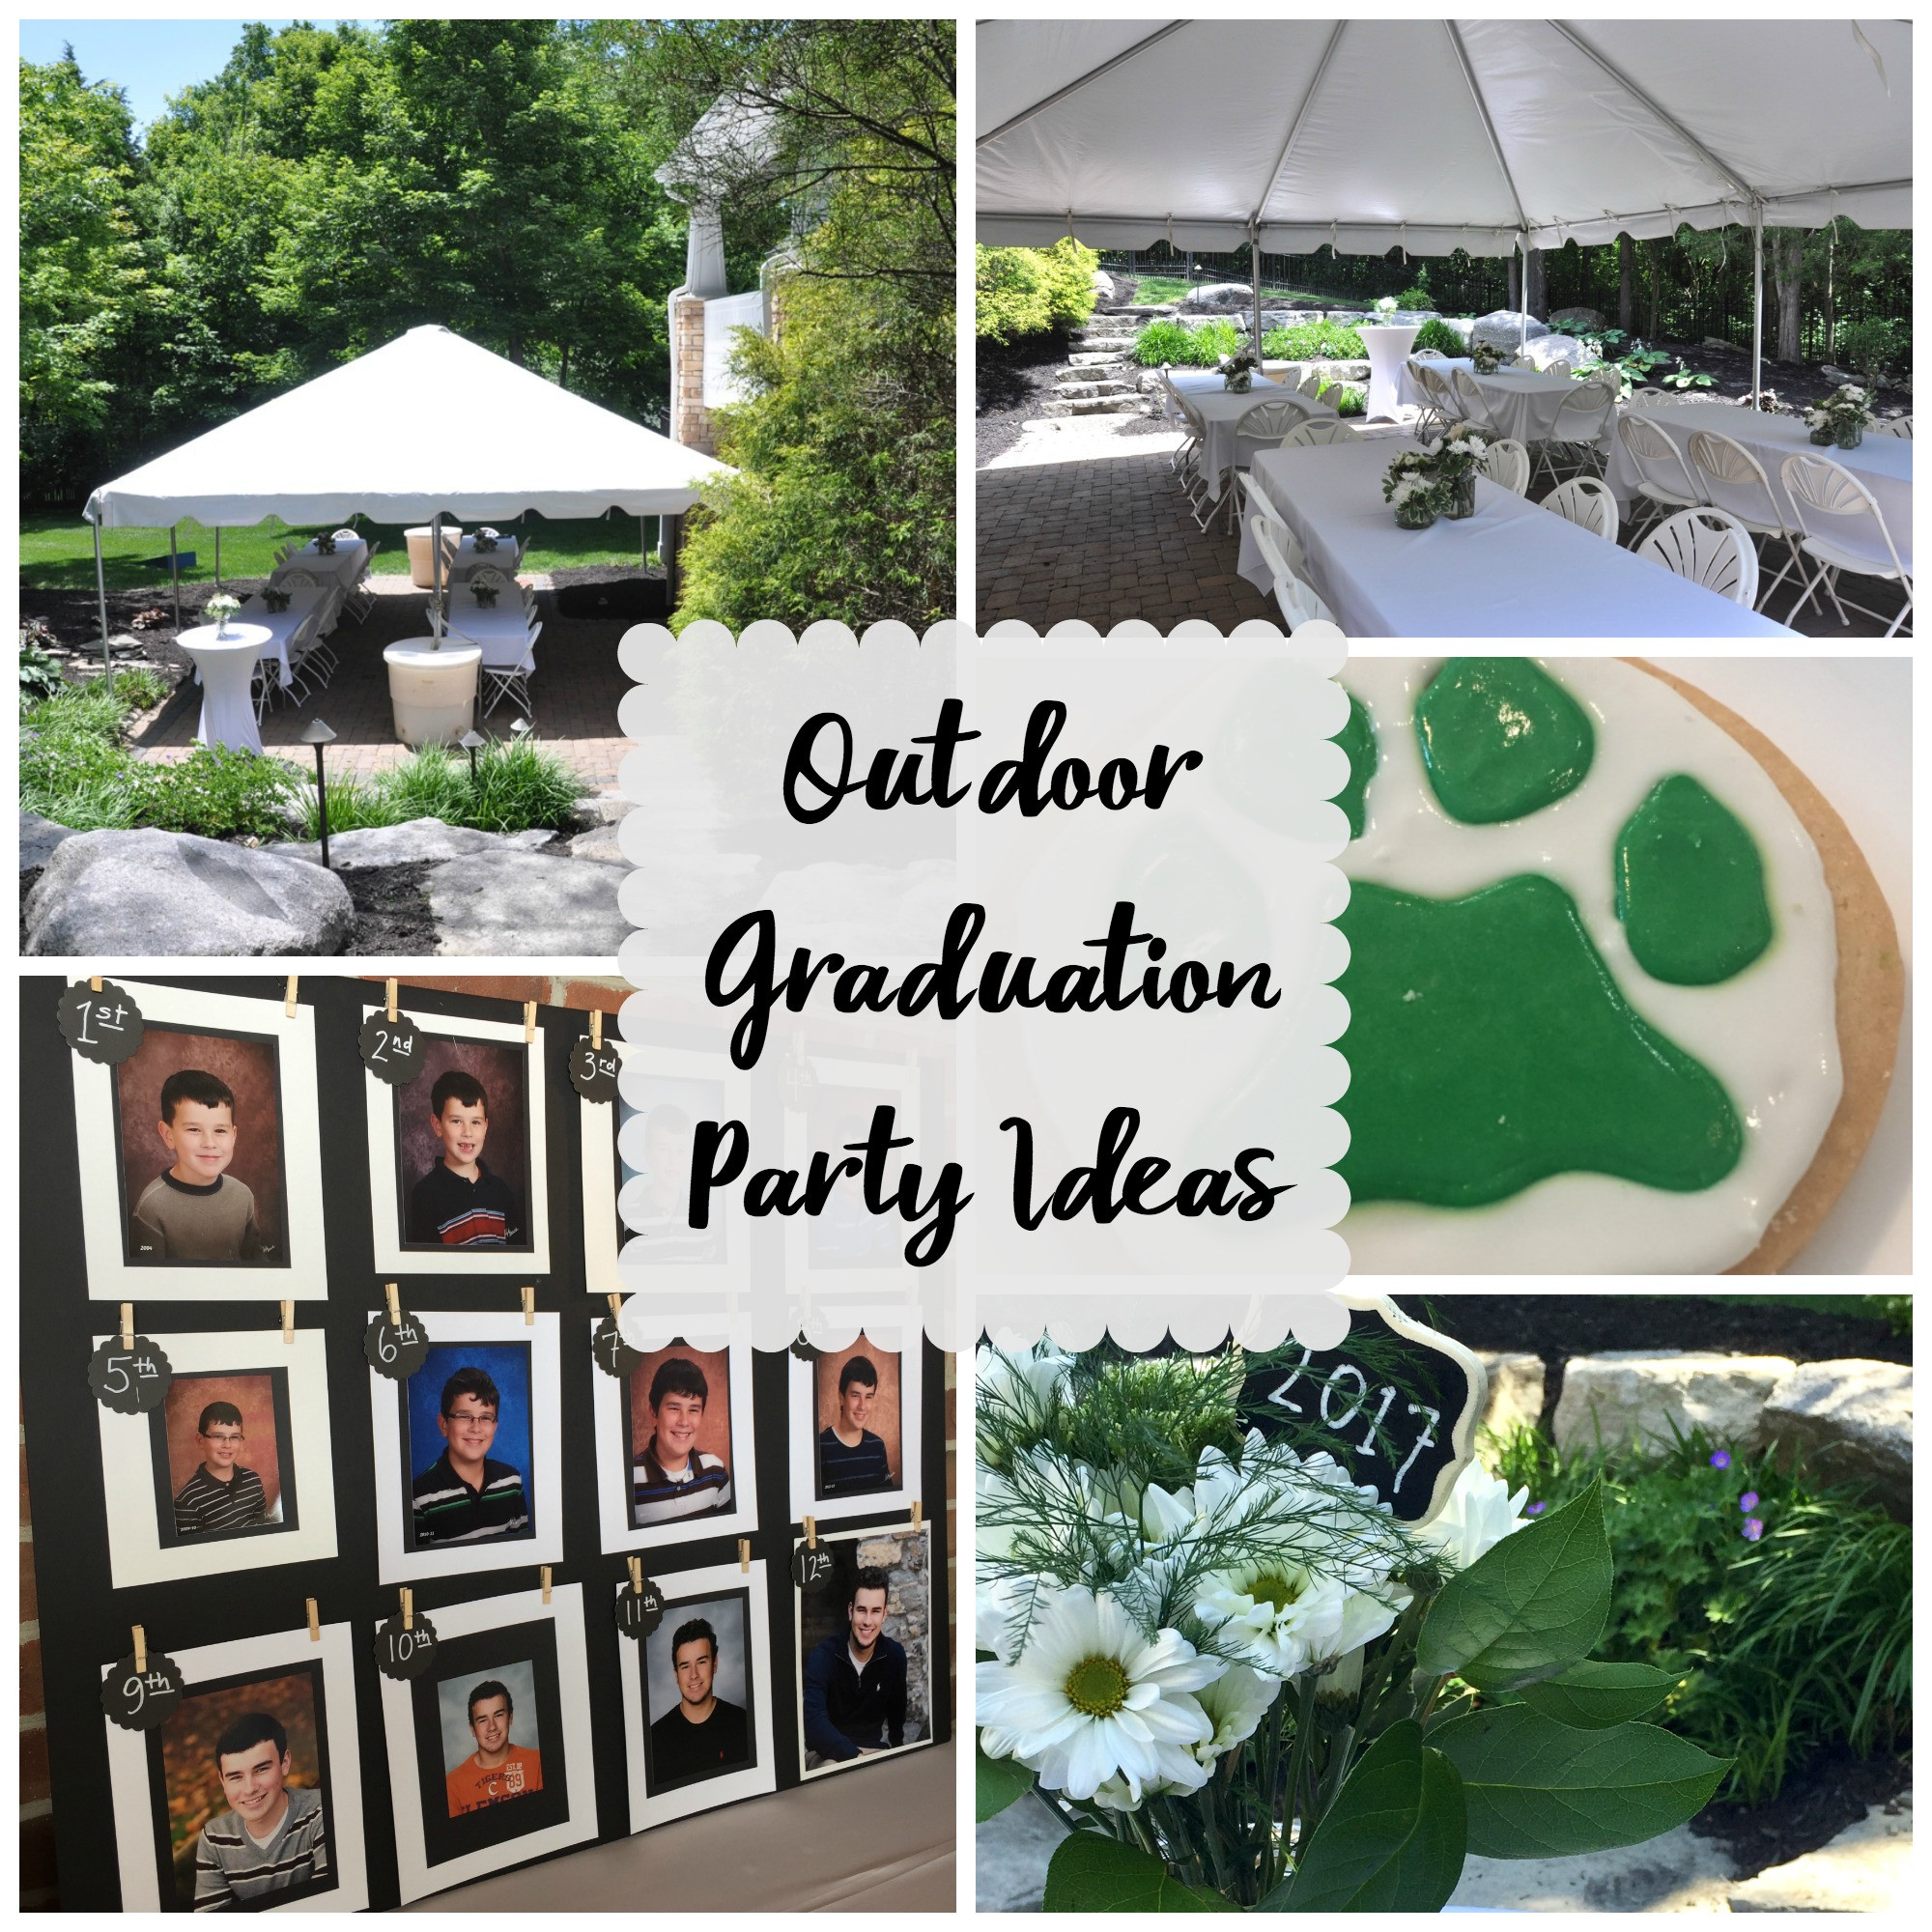 College Graduation Party Ideas Pinterest
 Outdoor Graduation Party Evolution of Style